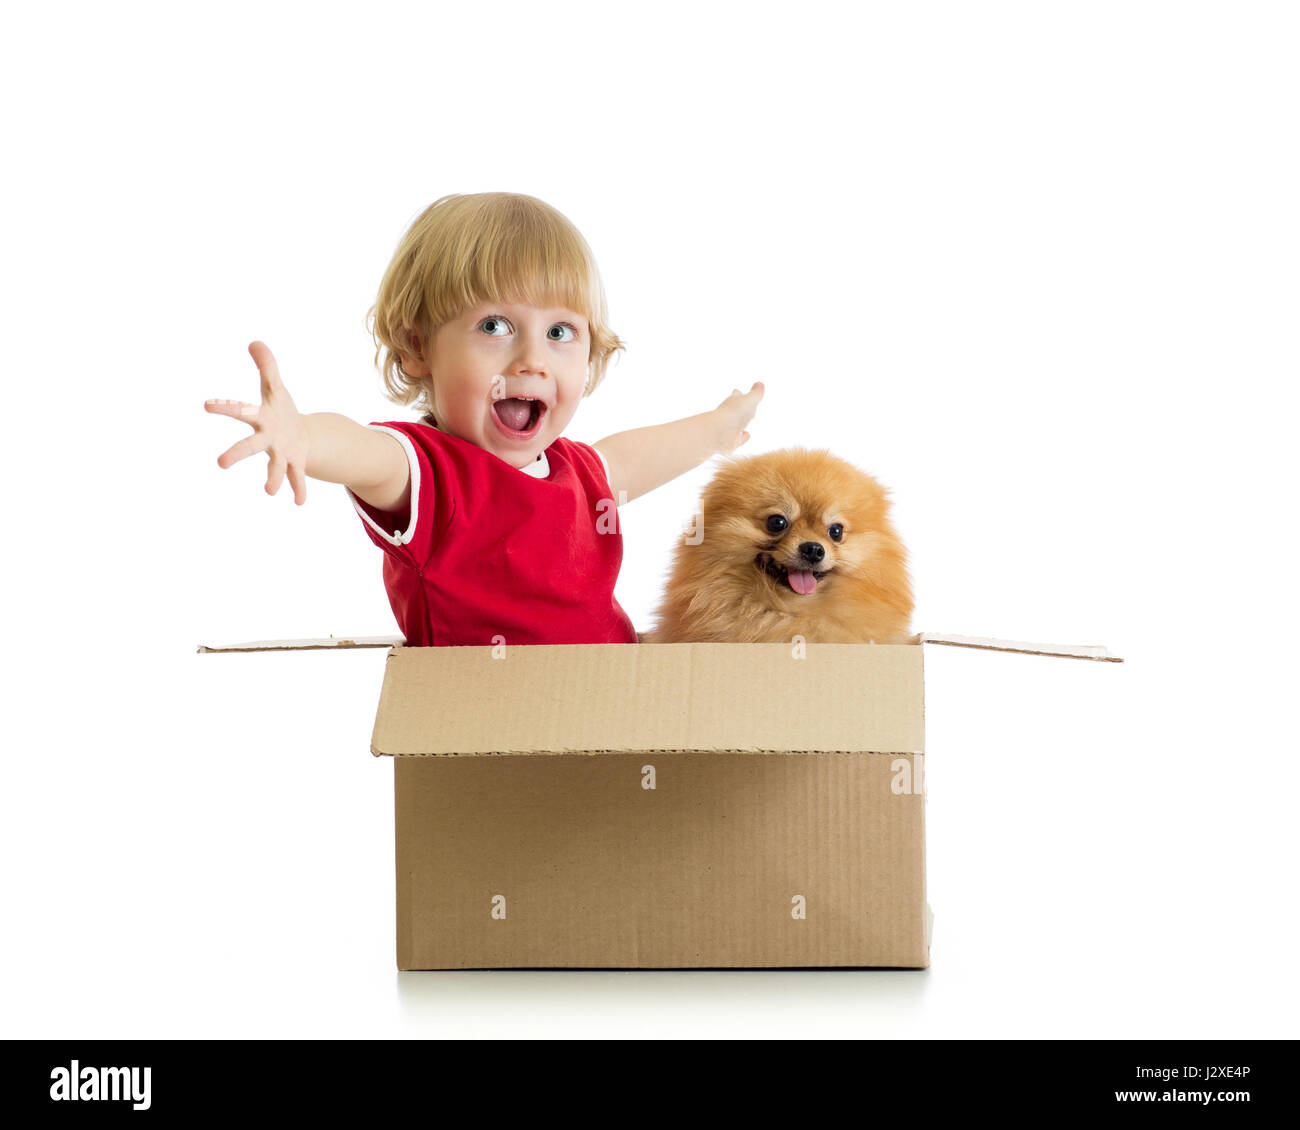 Smiling child and dog in cardbox isolated on white background Stock Photo